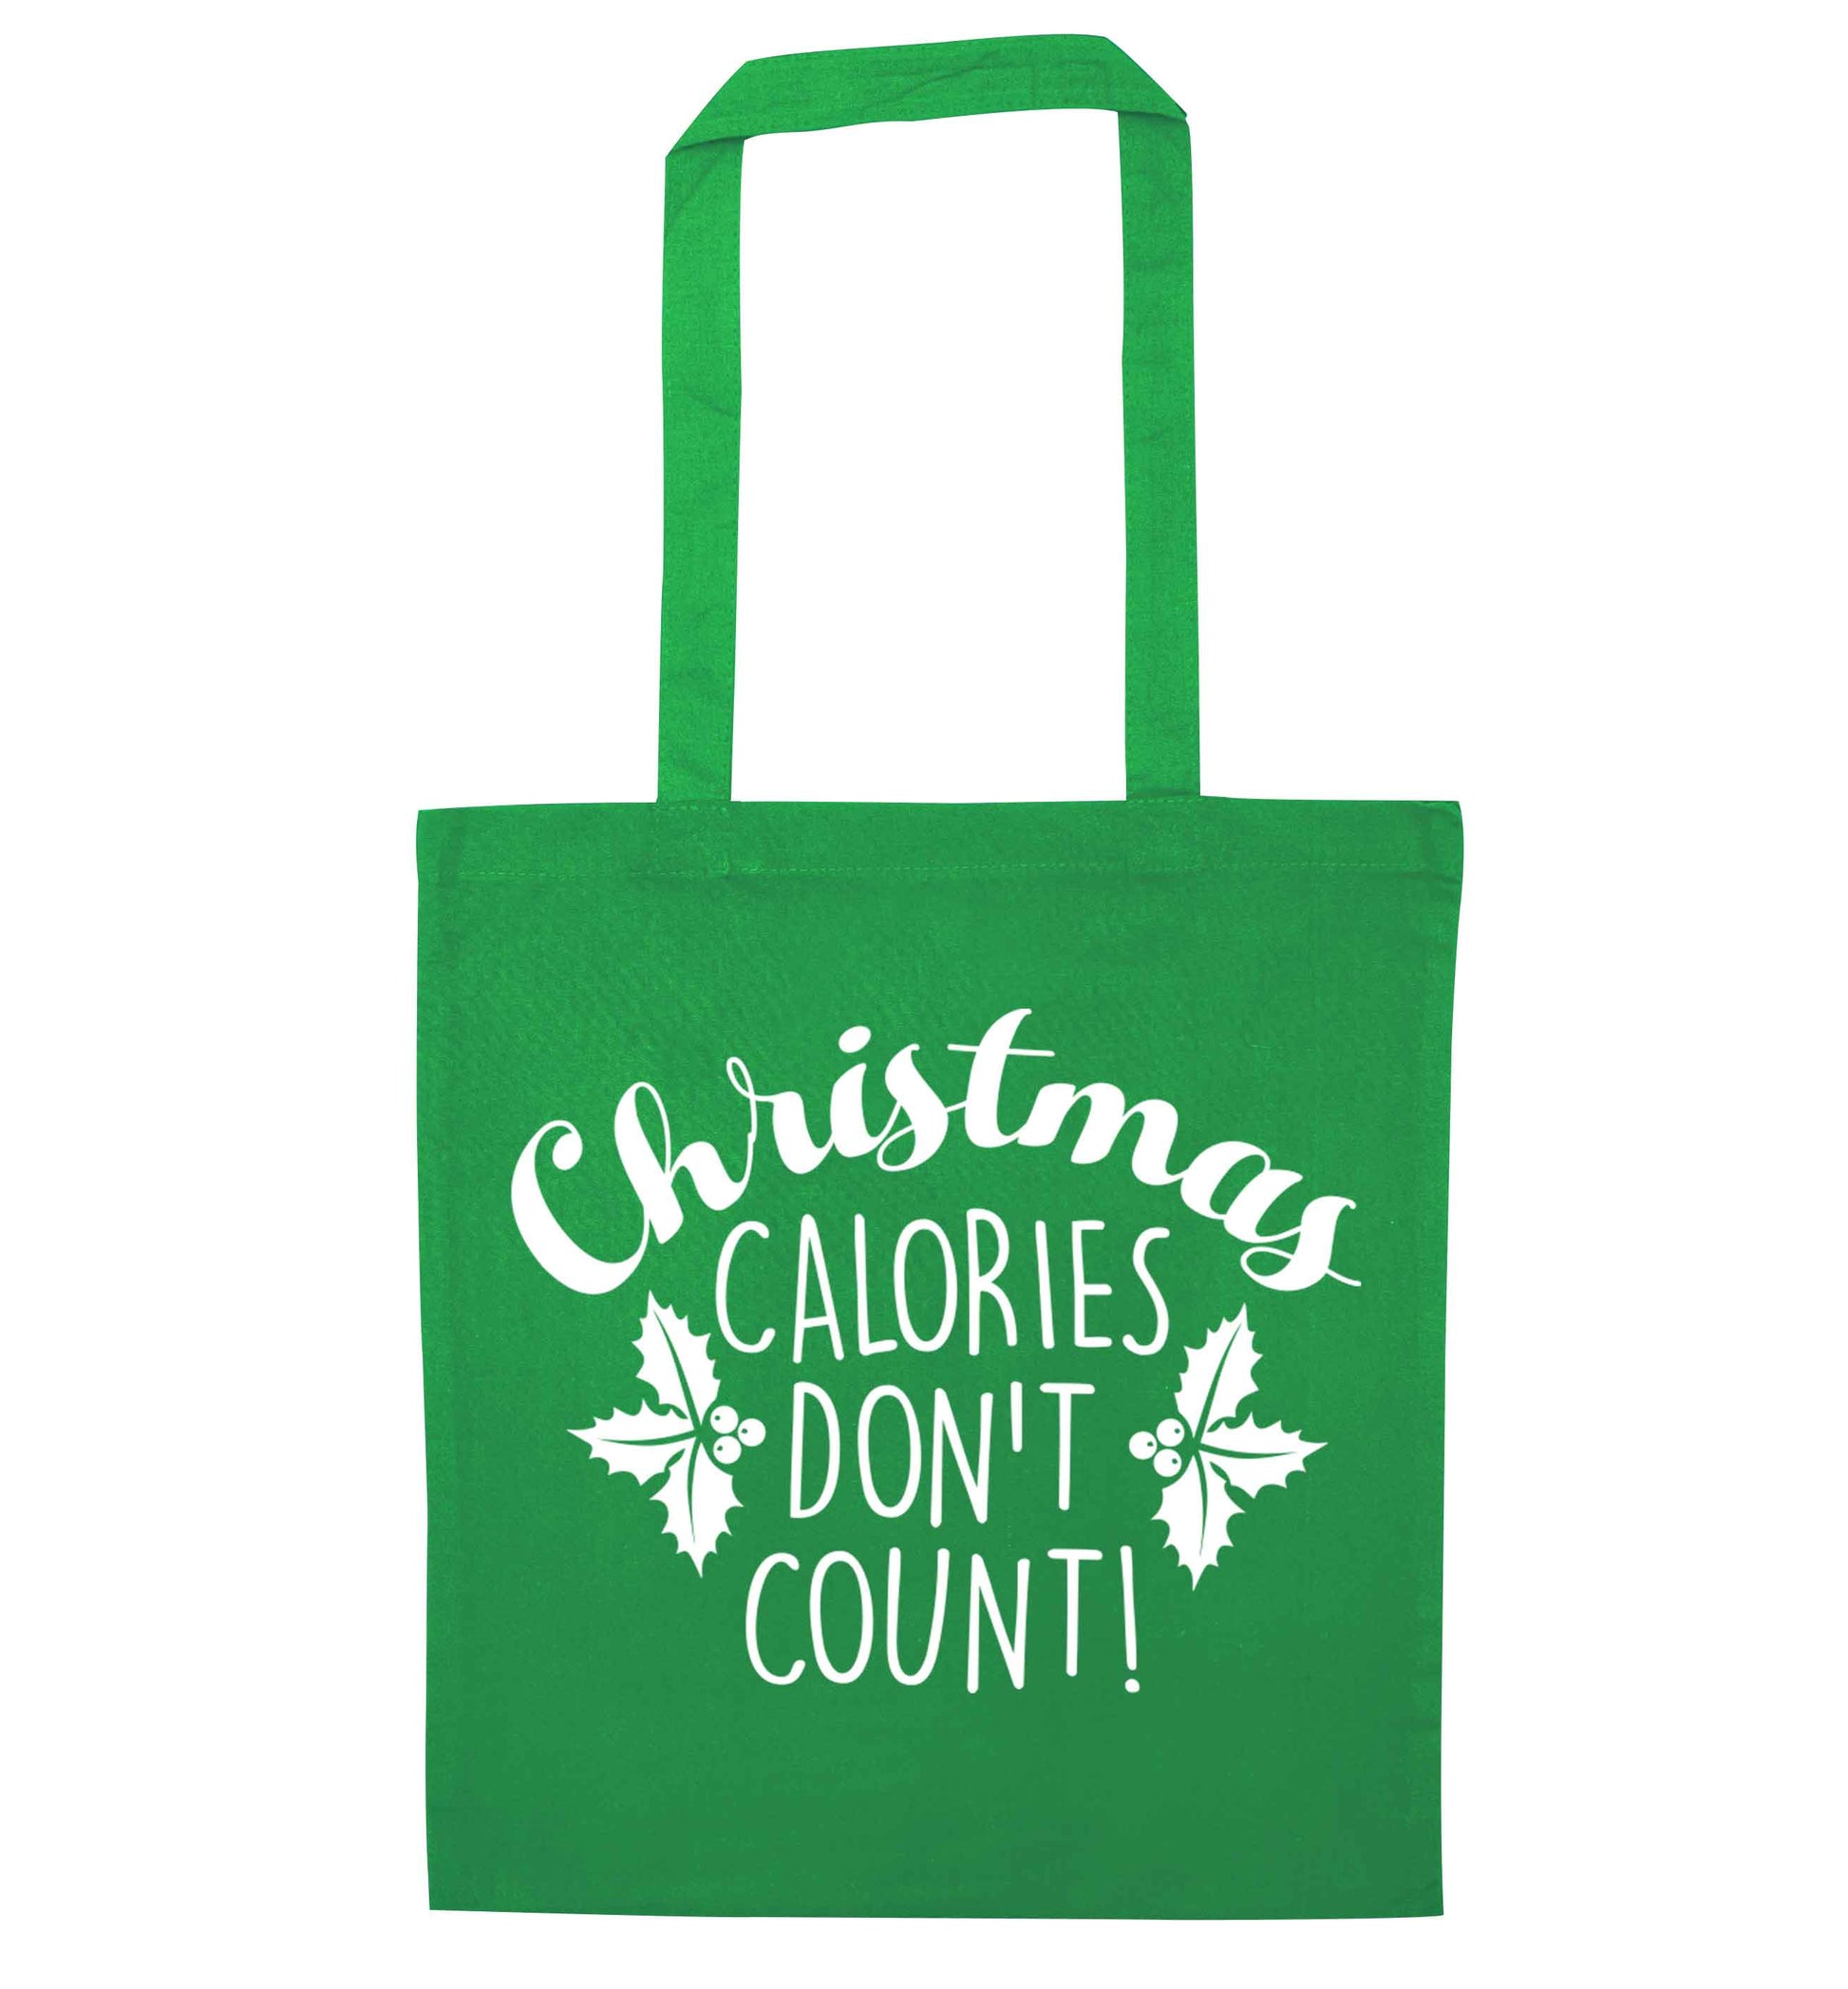 Christmas calories don't count green tote bag